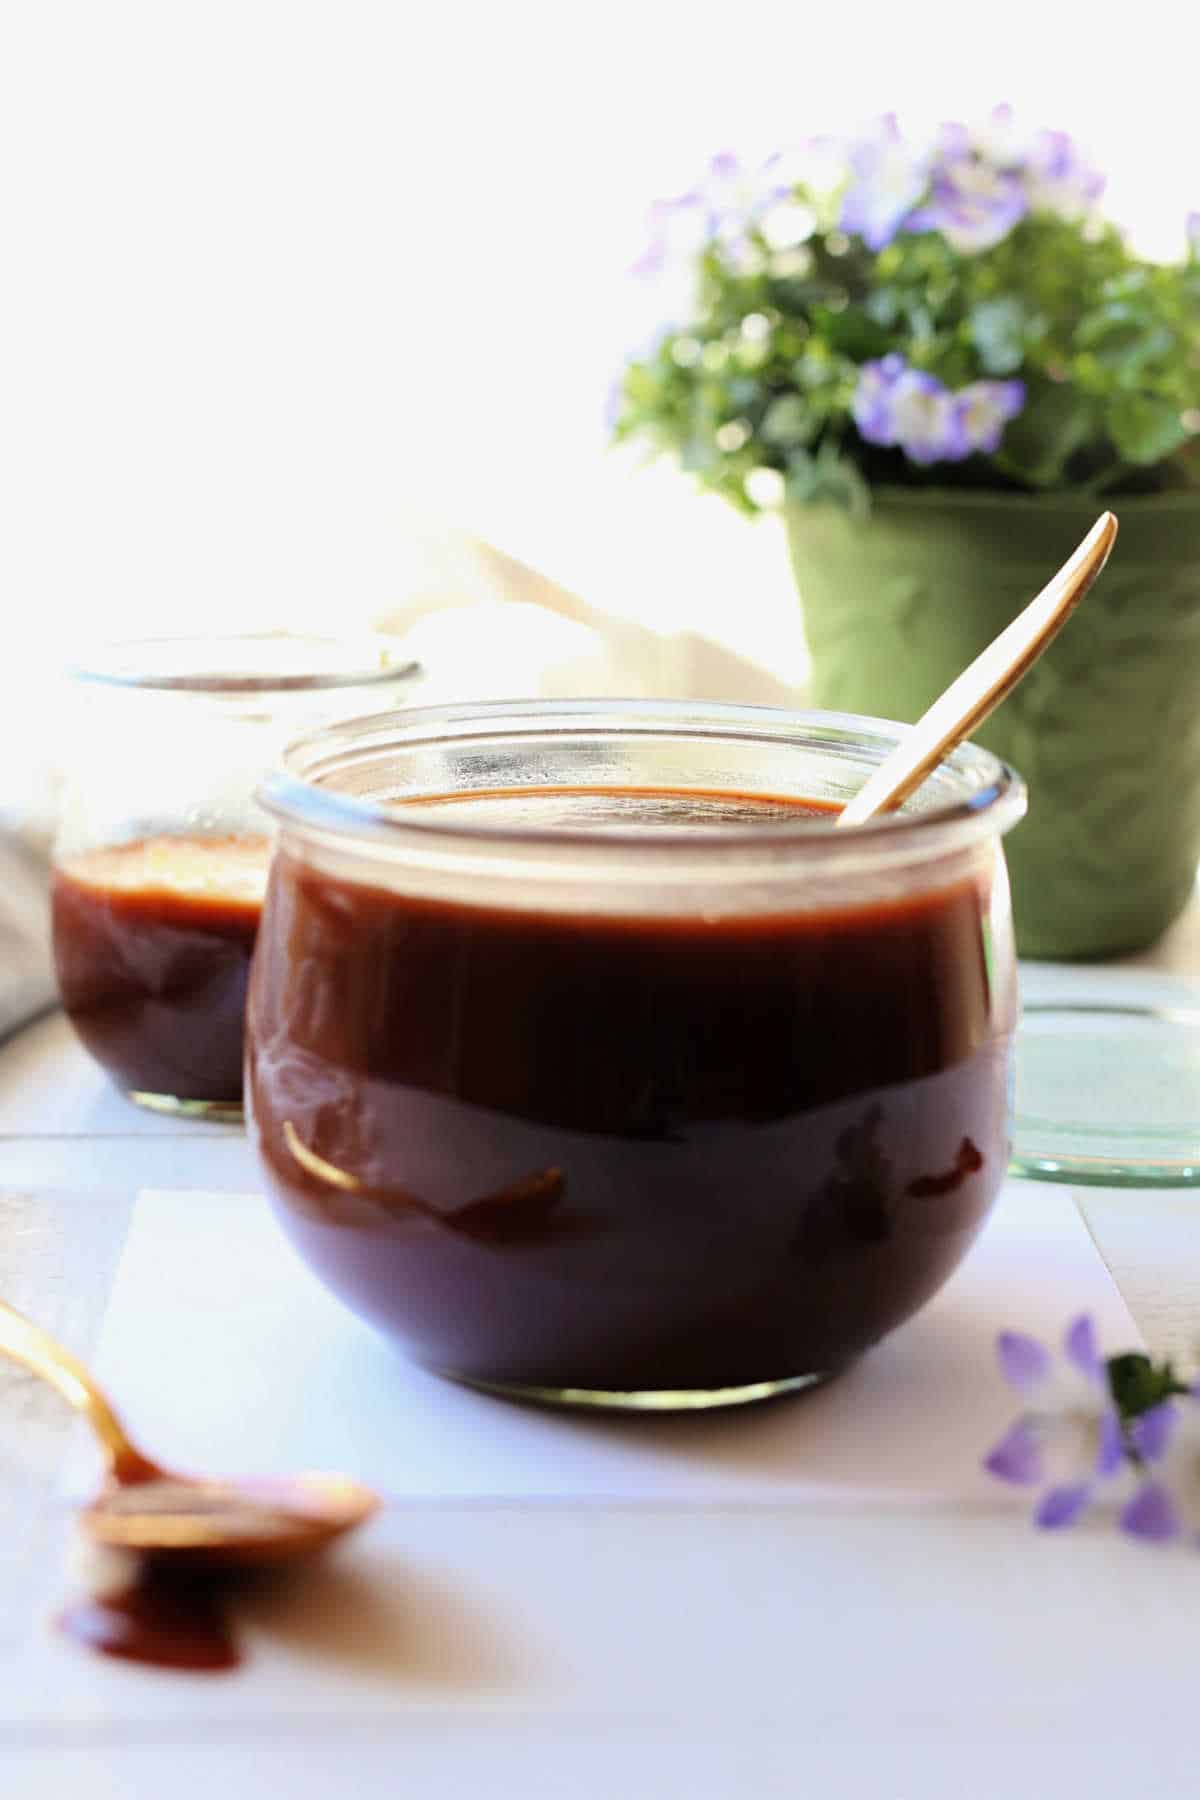 Gluten-free BBQ sauce used for marinade and grilling recipes.